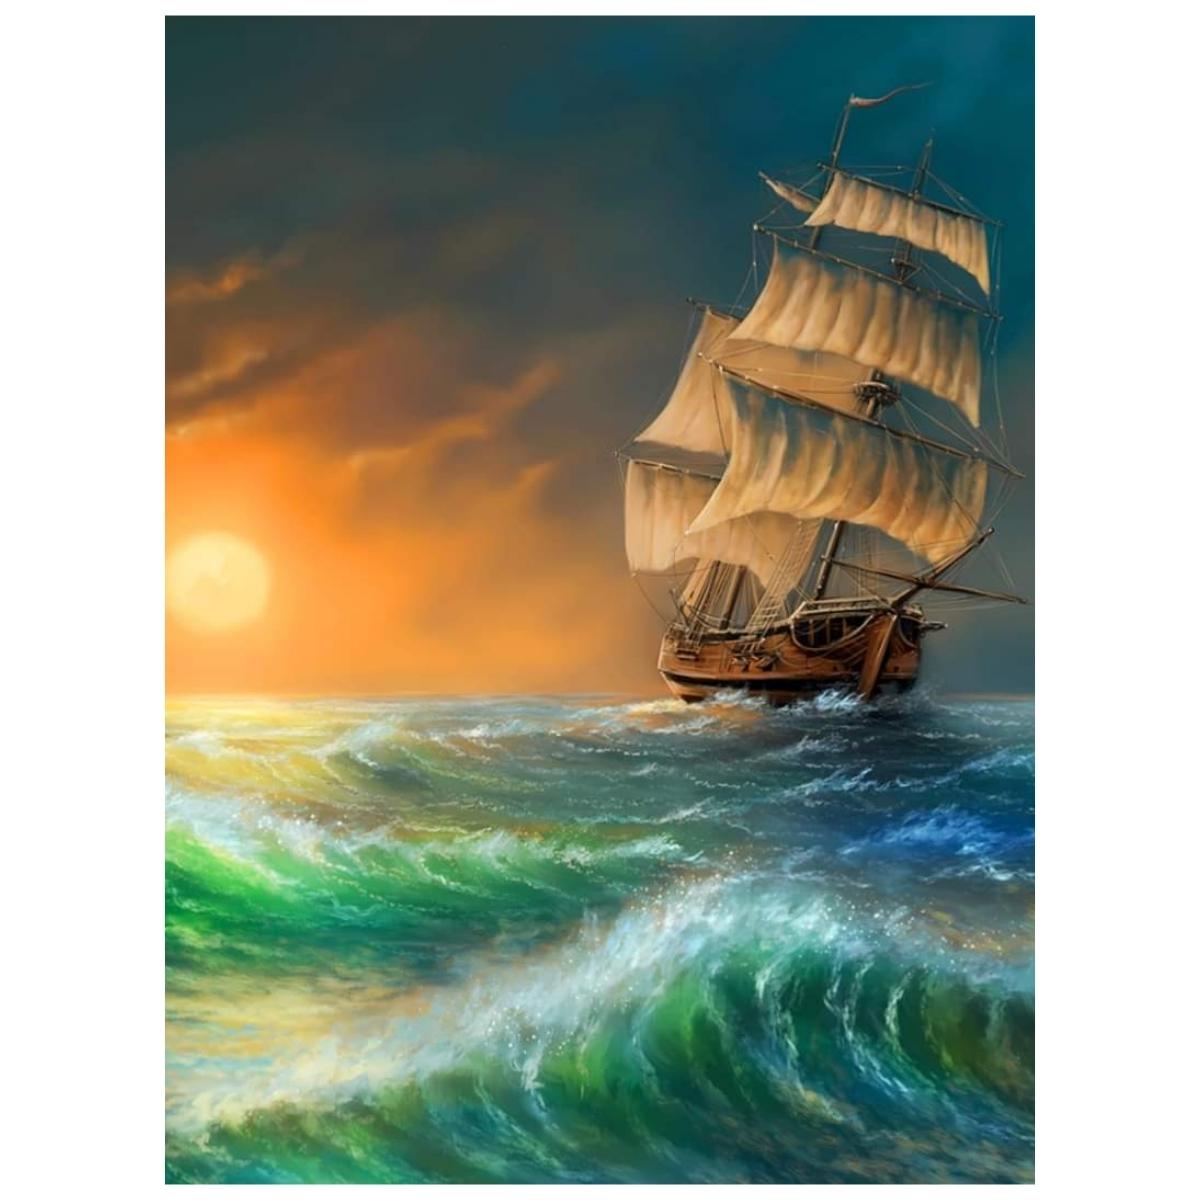 Waves & Ship - Paint By Numbers Kit